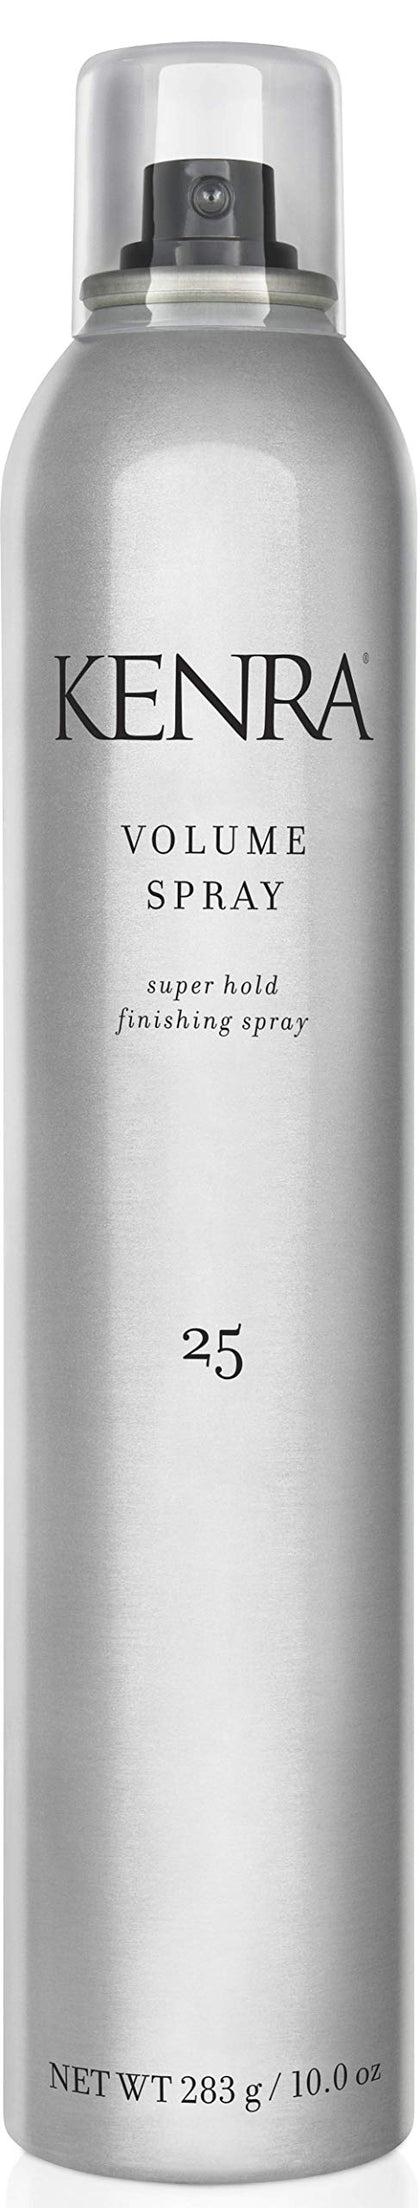 Kenra Professional Volume Spray 25 50% | Super Hold Finishing & Styling Hairspray | Flake-free & Fast-drying | Wind & Humidity Resistance | All Hair Types | 10 oz